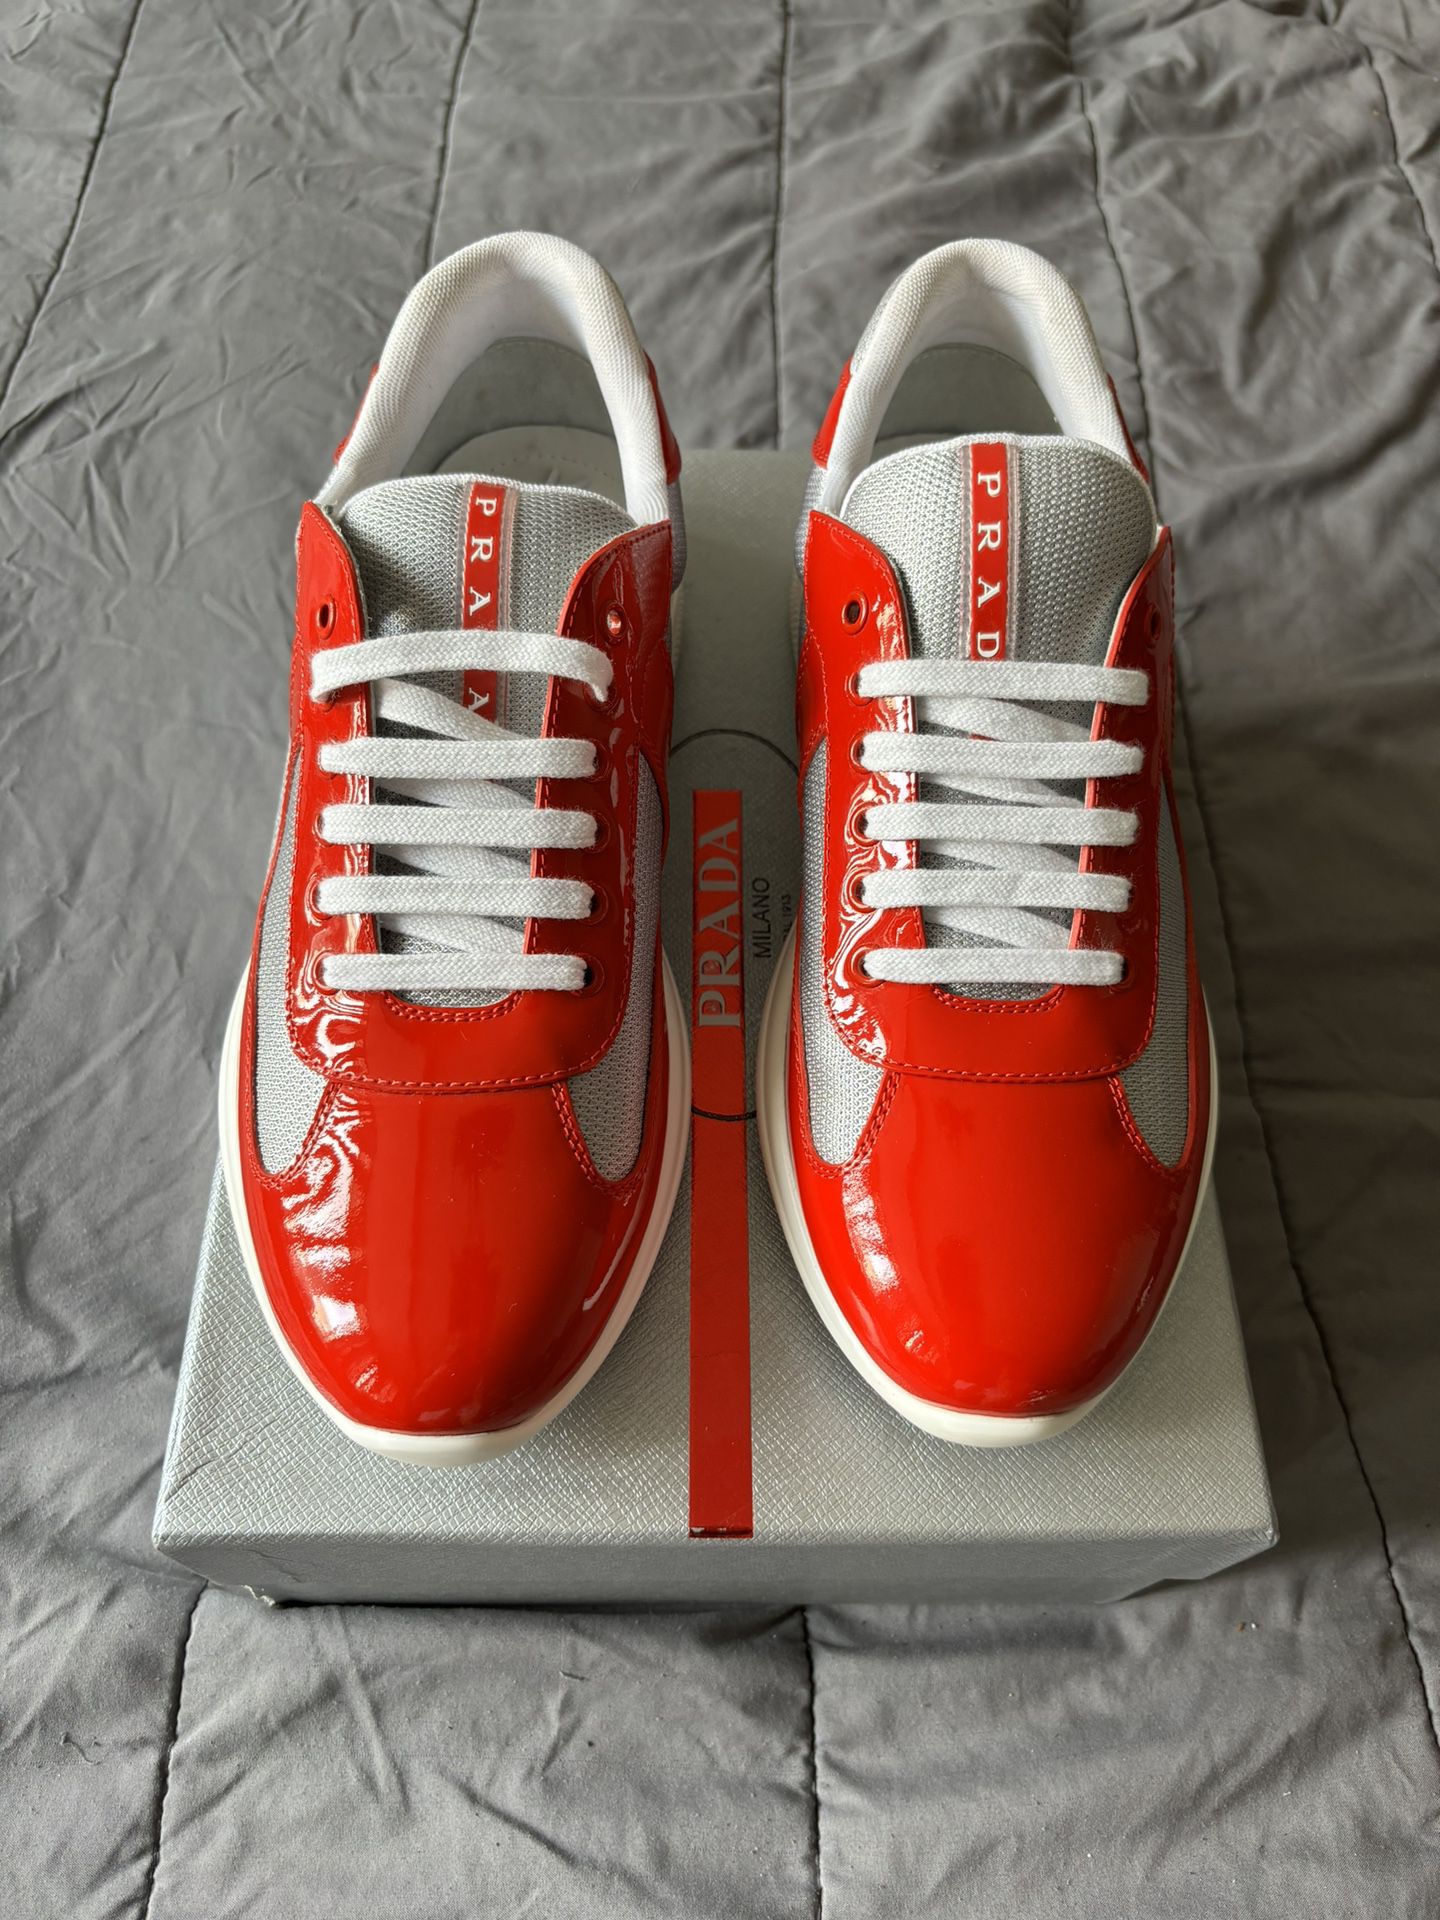 Prada Americas Cup Red Size 43 (Shipping Only, Come With Original Box)